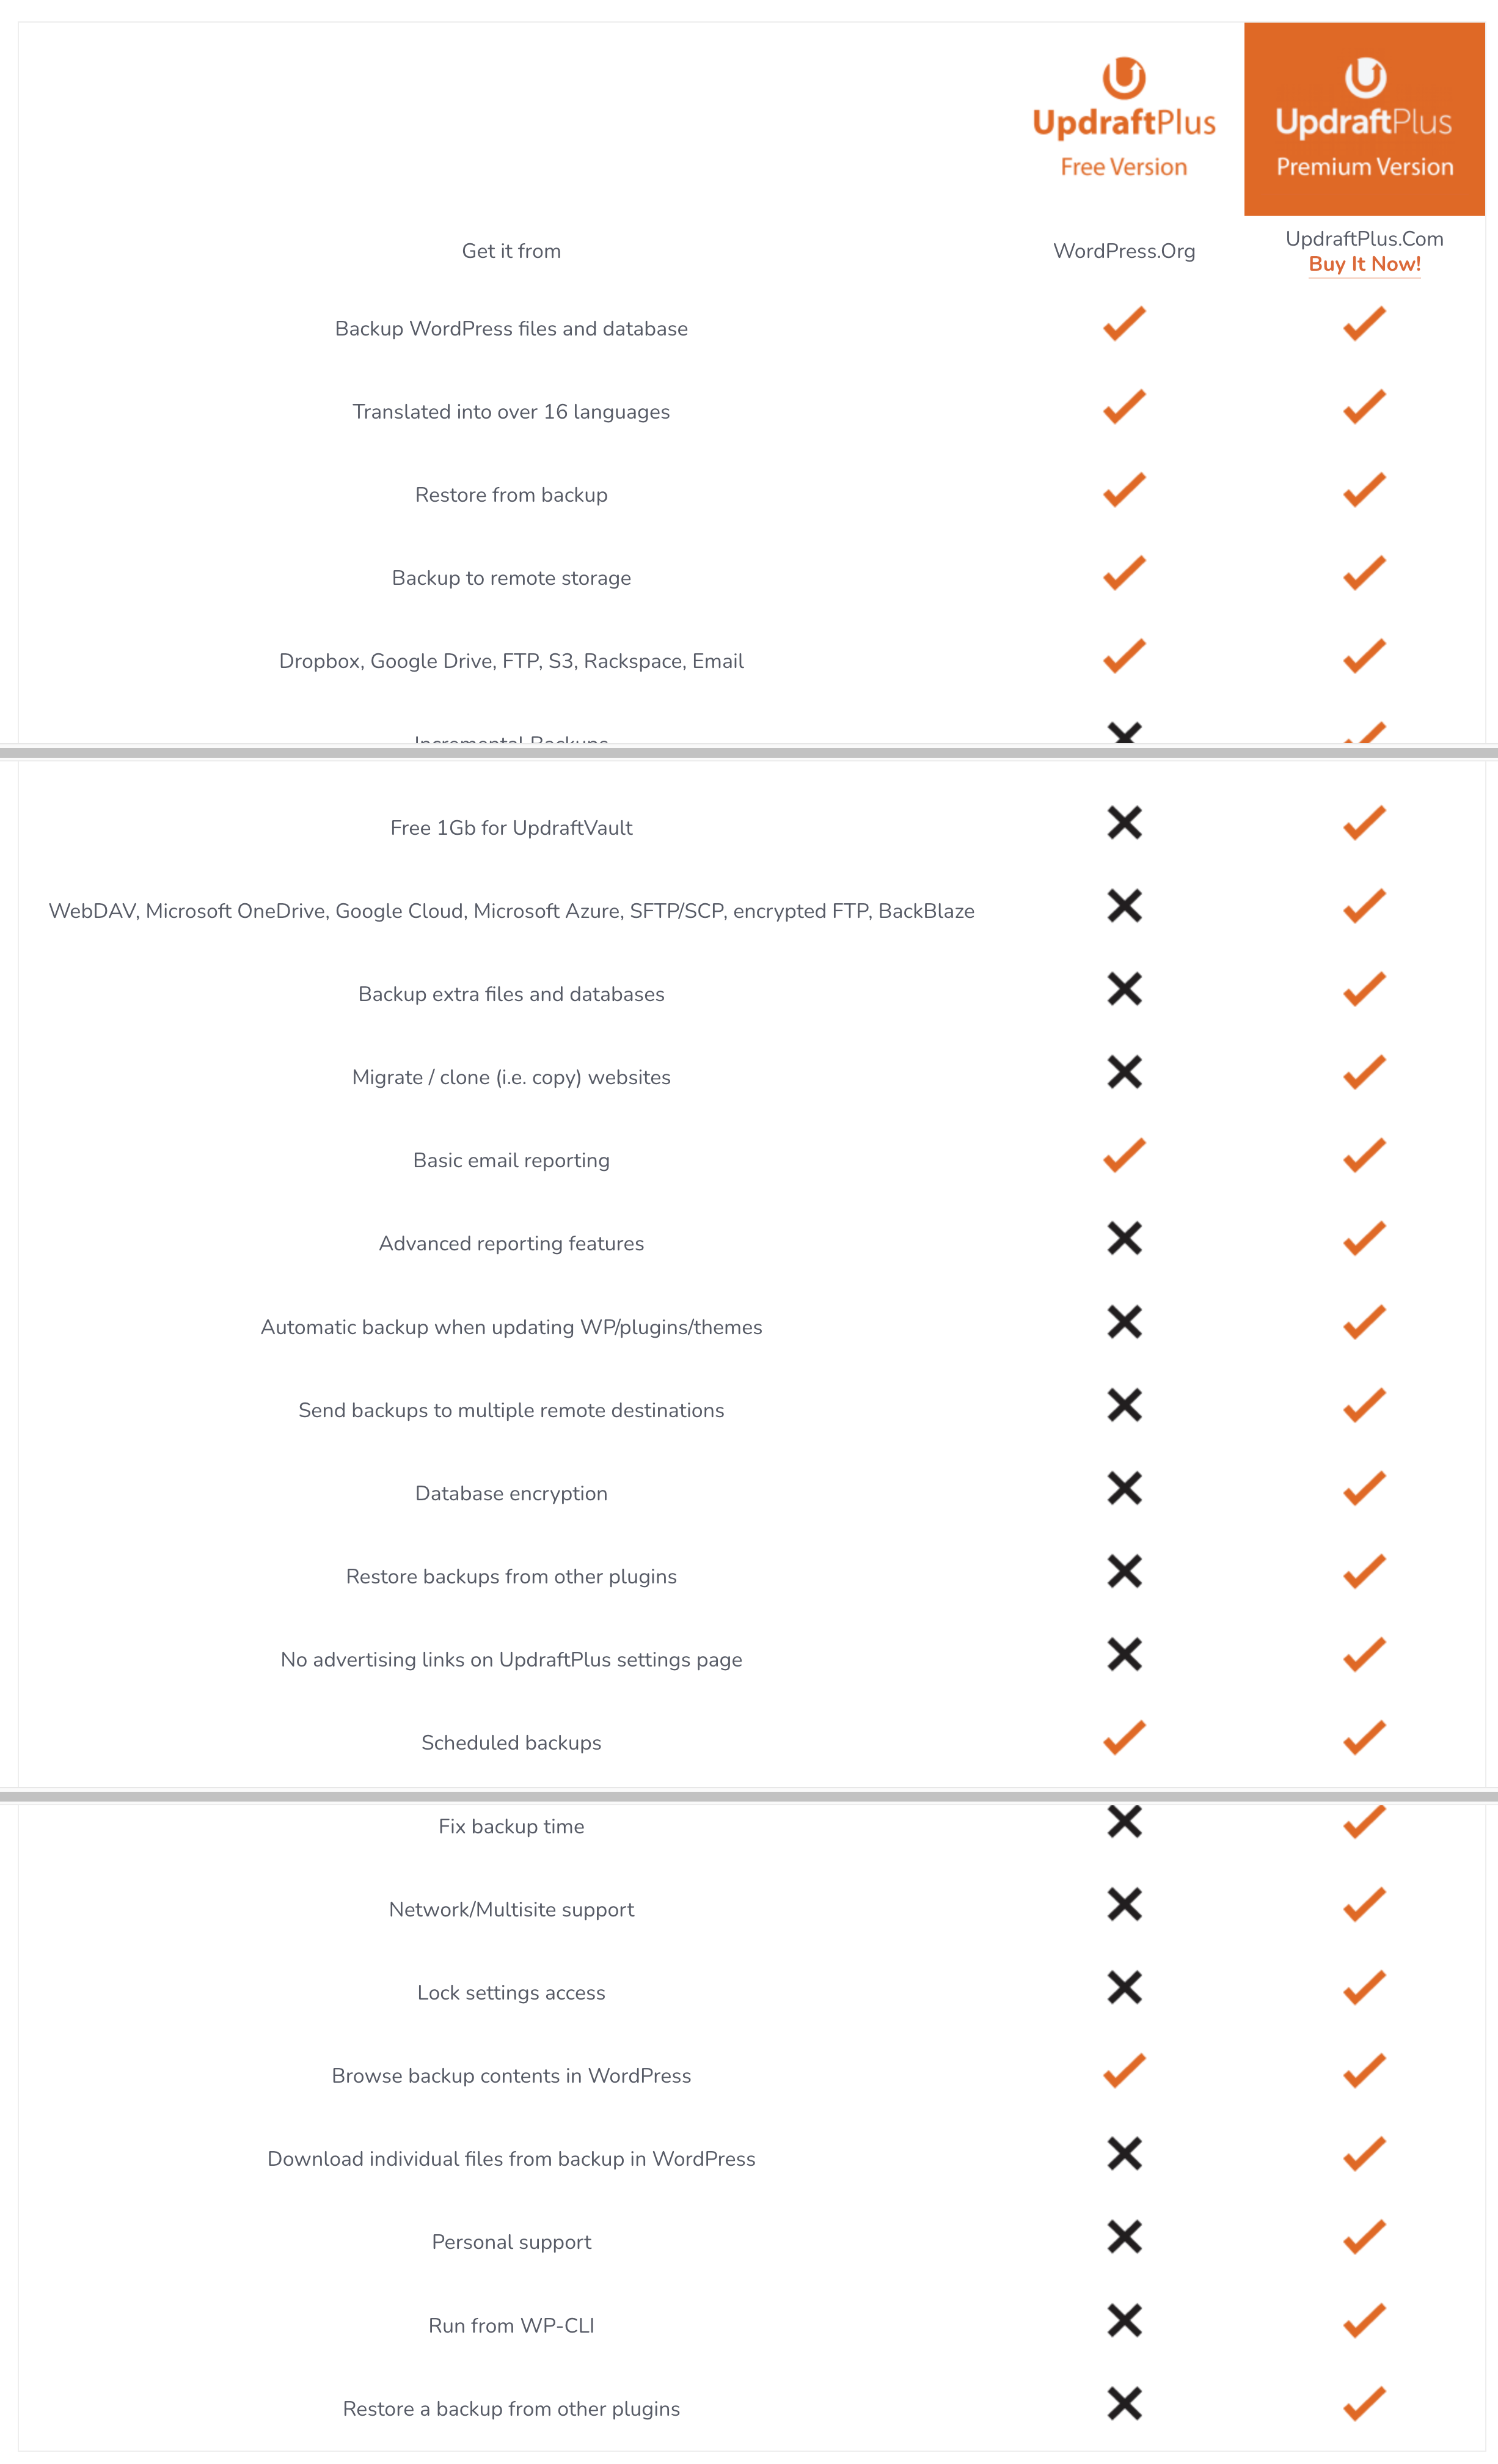 Comparison between the free and premium versions of UpdraftPlus.